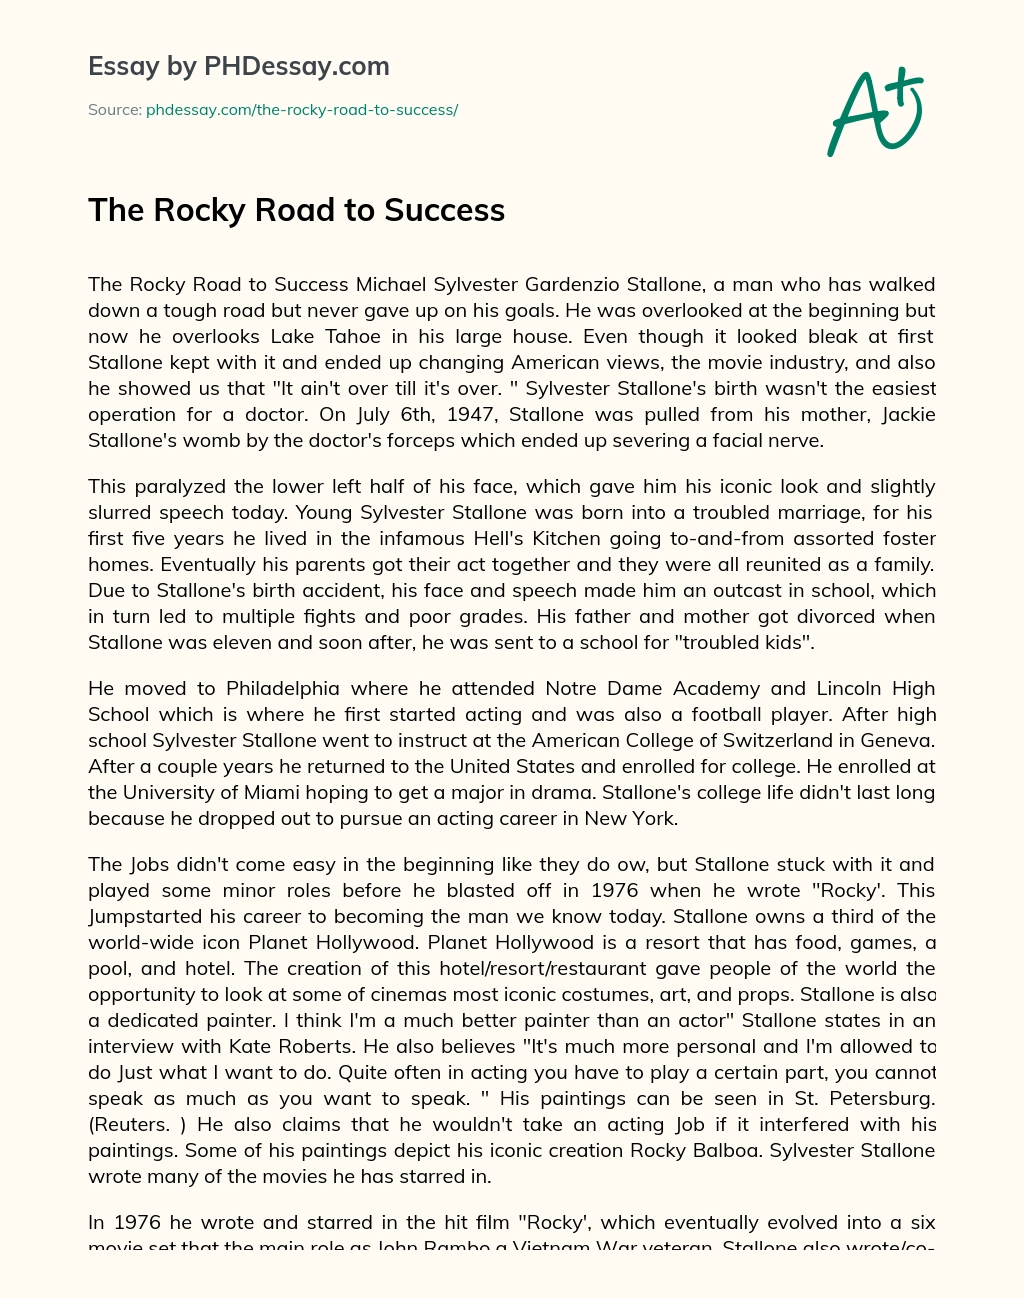 The Rocky Road to Success essay